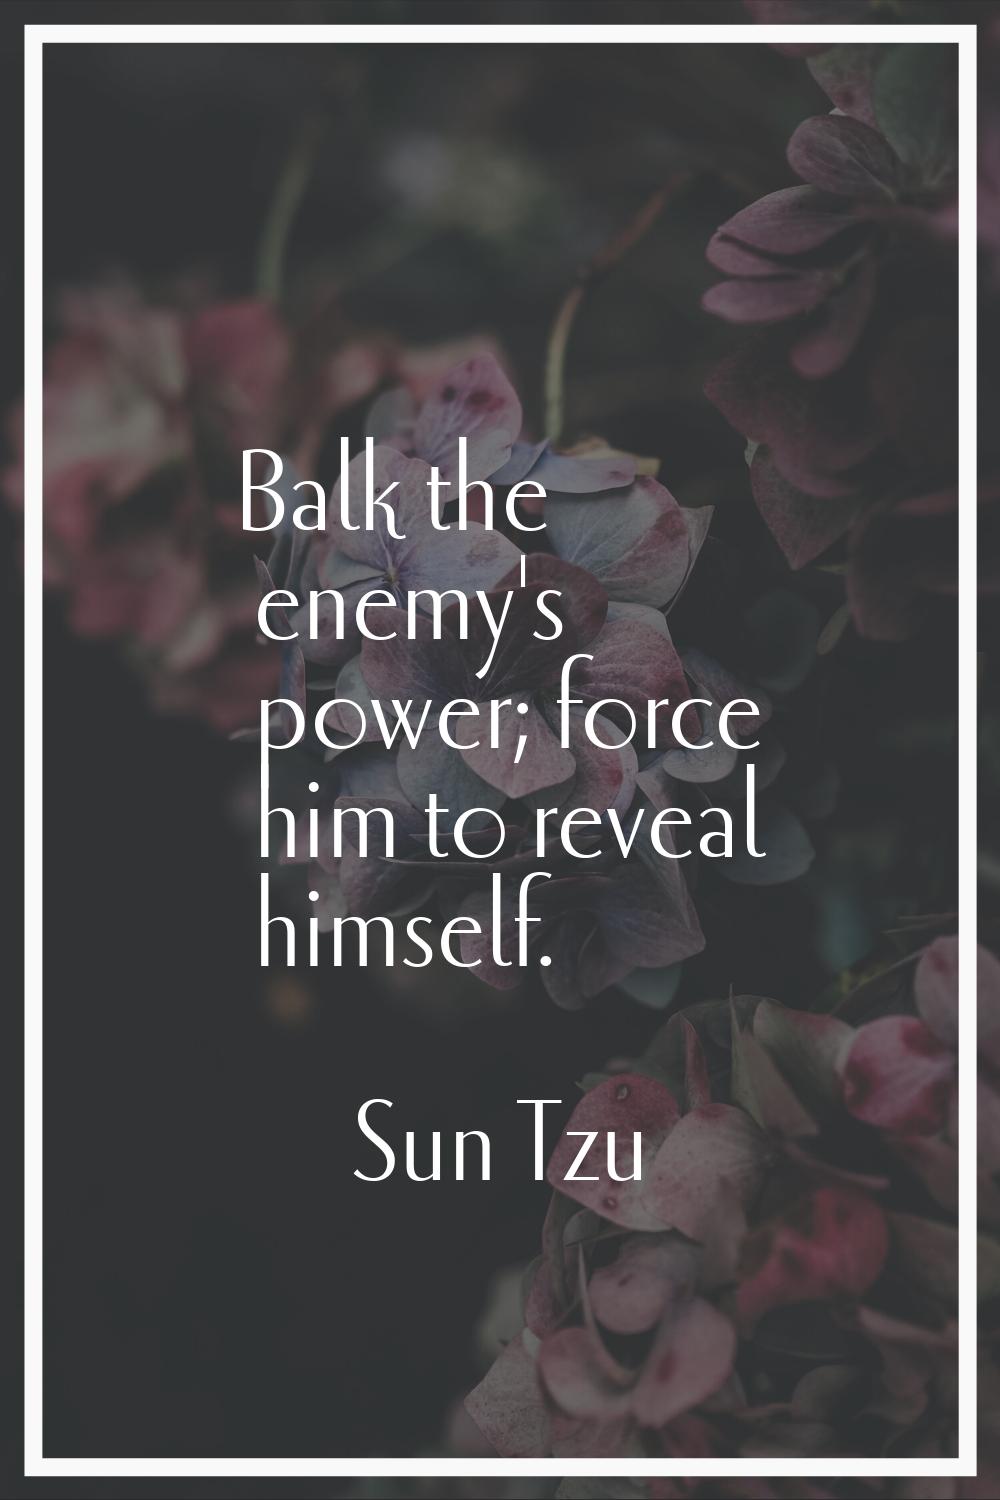 Balk the enemy's power; force him to reveal himself.